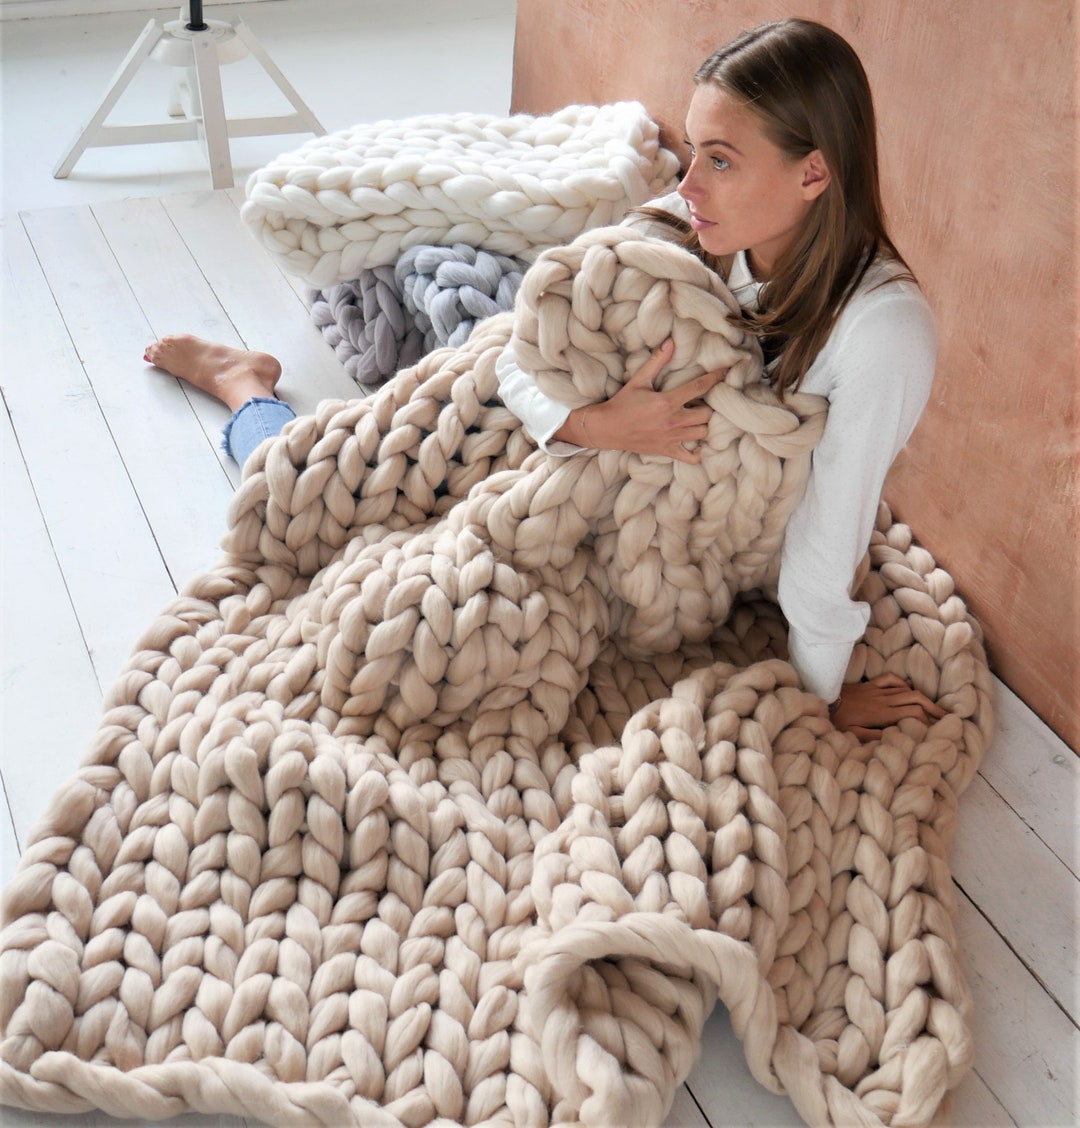 Ganlinia Chunky Knit Blanket Merino Wool Blend Giant Yarn Soft Cable  Knitted Throw Handmade Home Decorate, Beige, 50x60